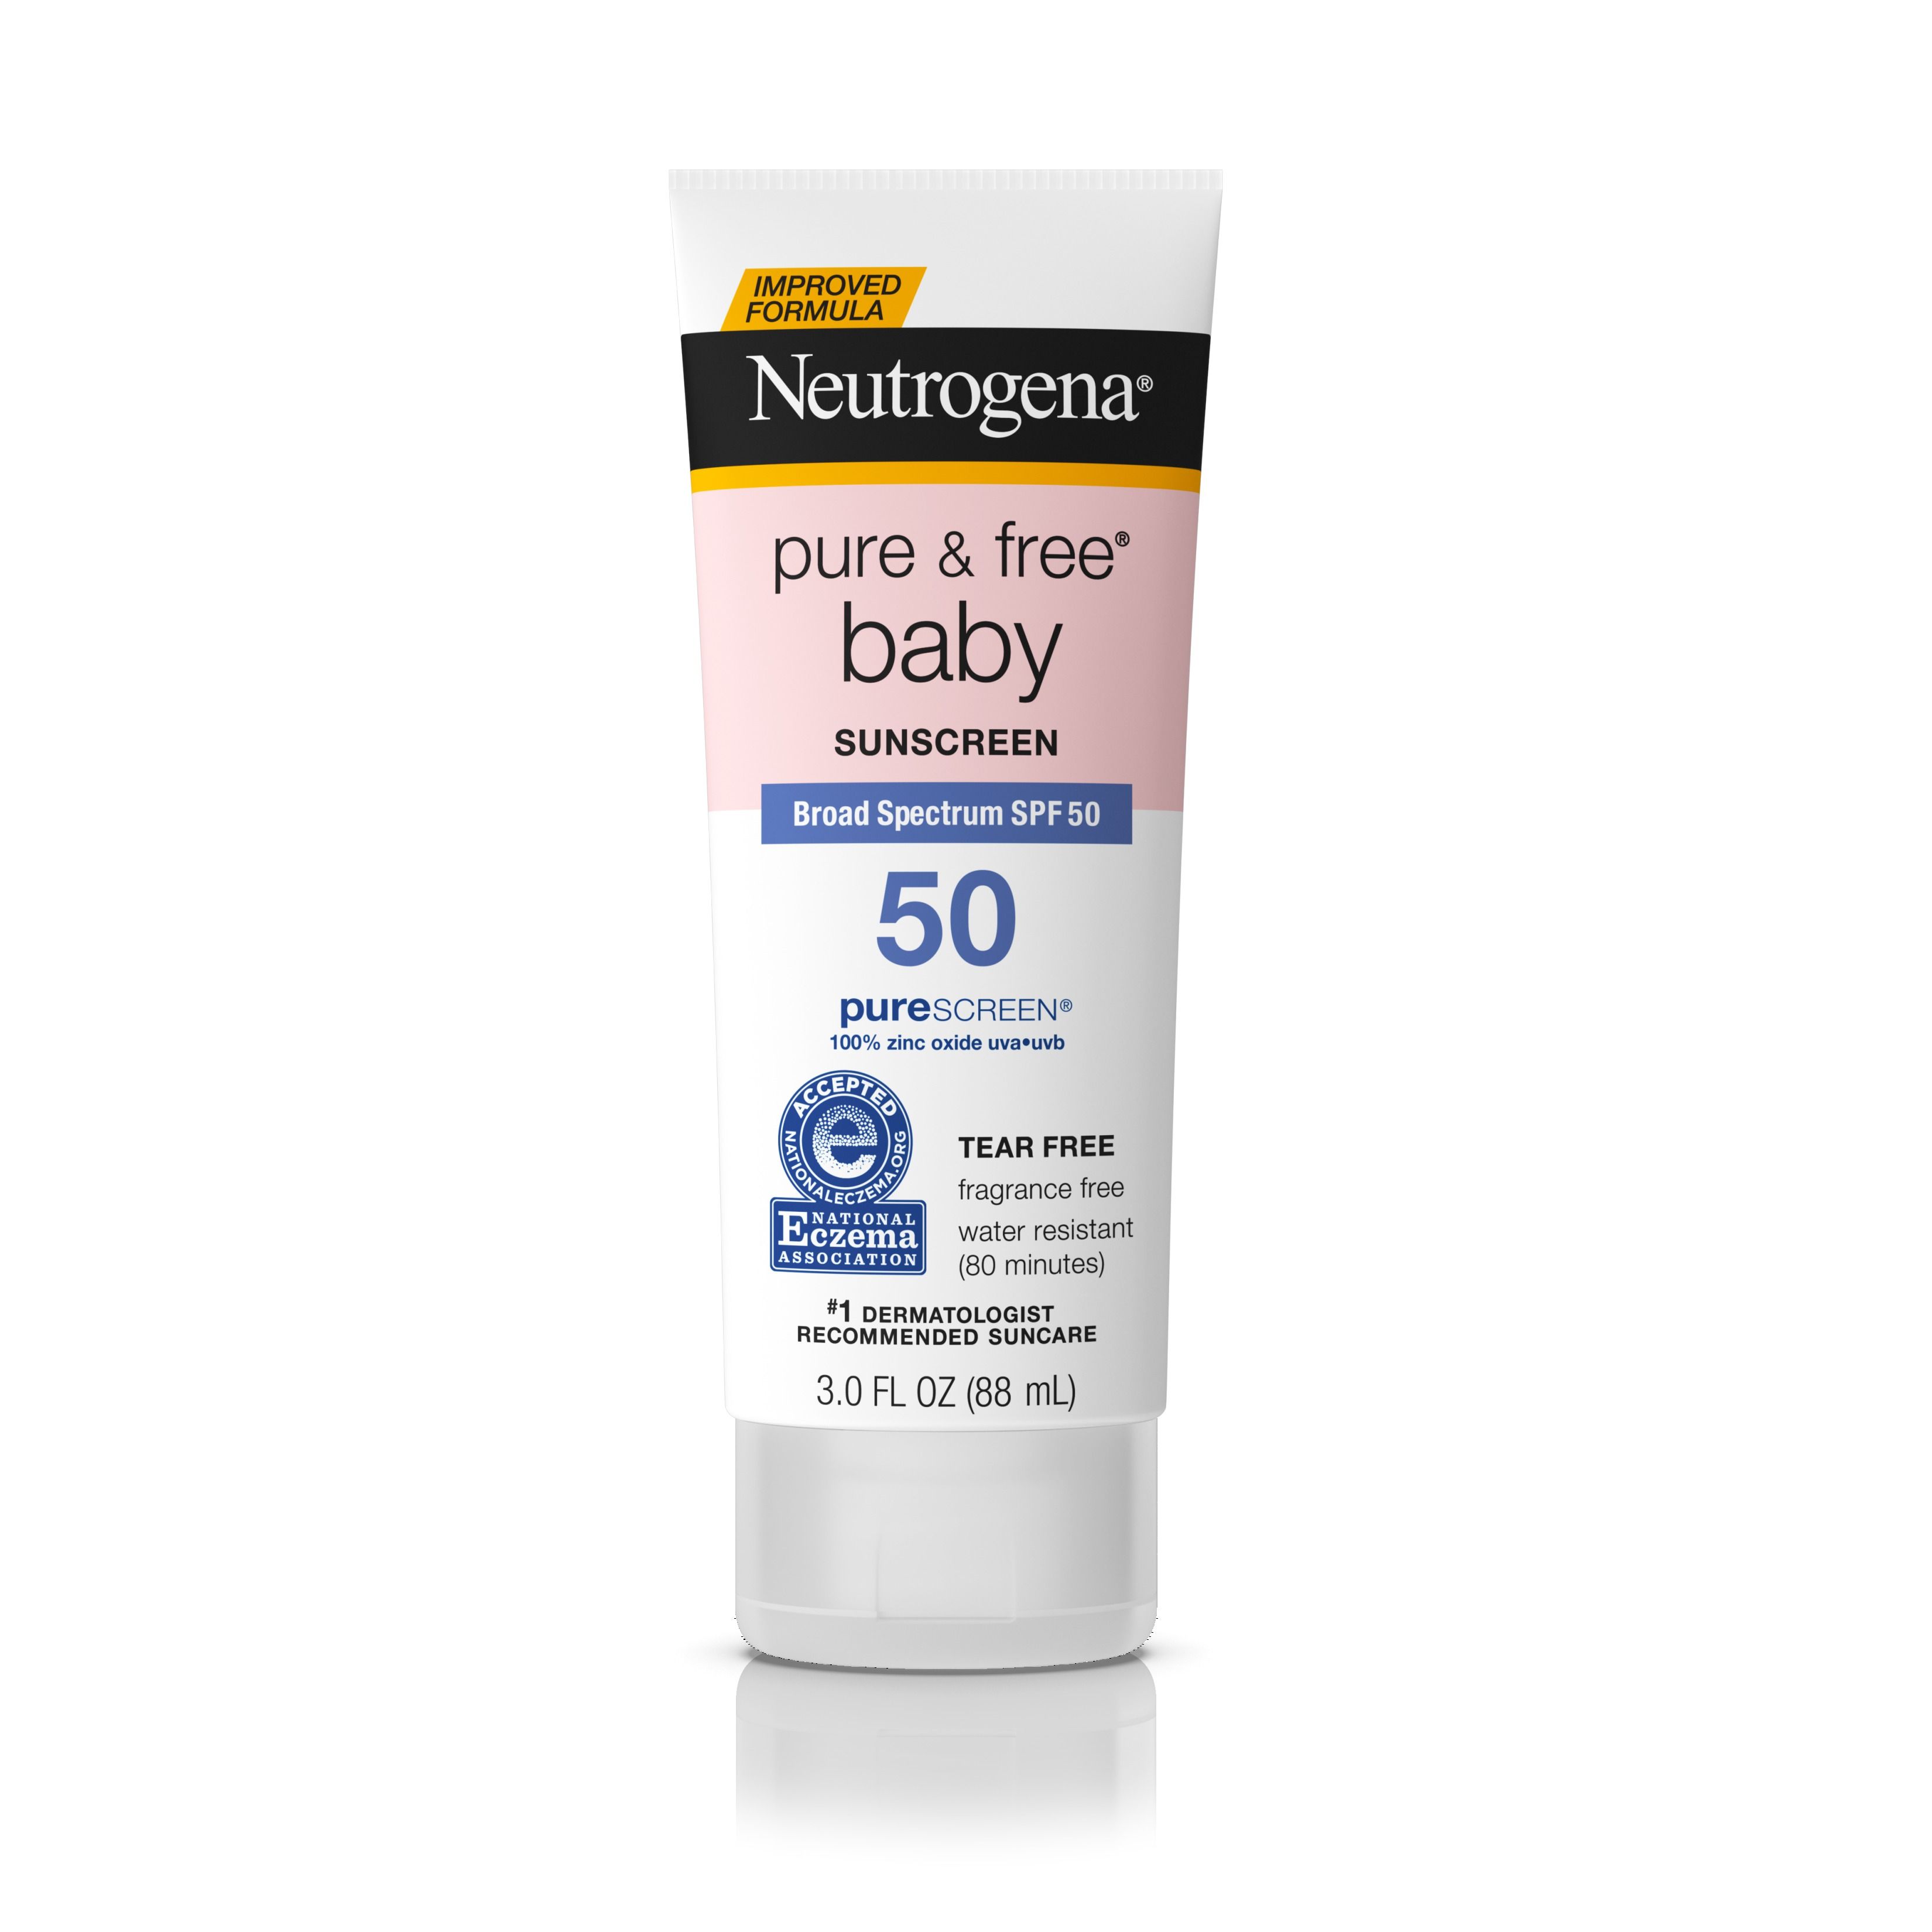 best non toxic sunscreen for kids